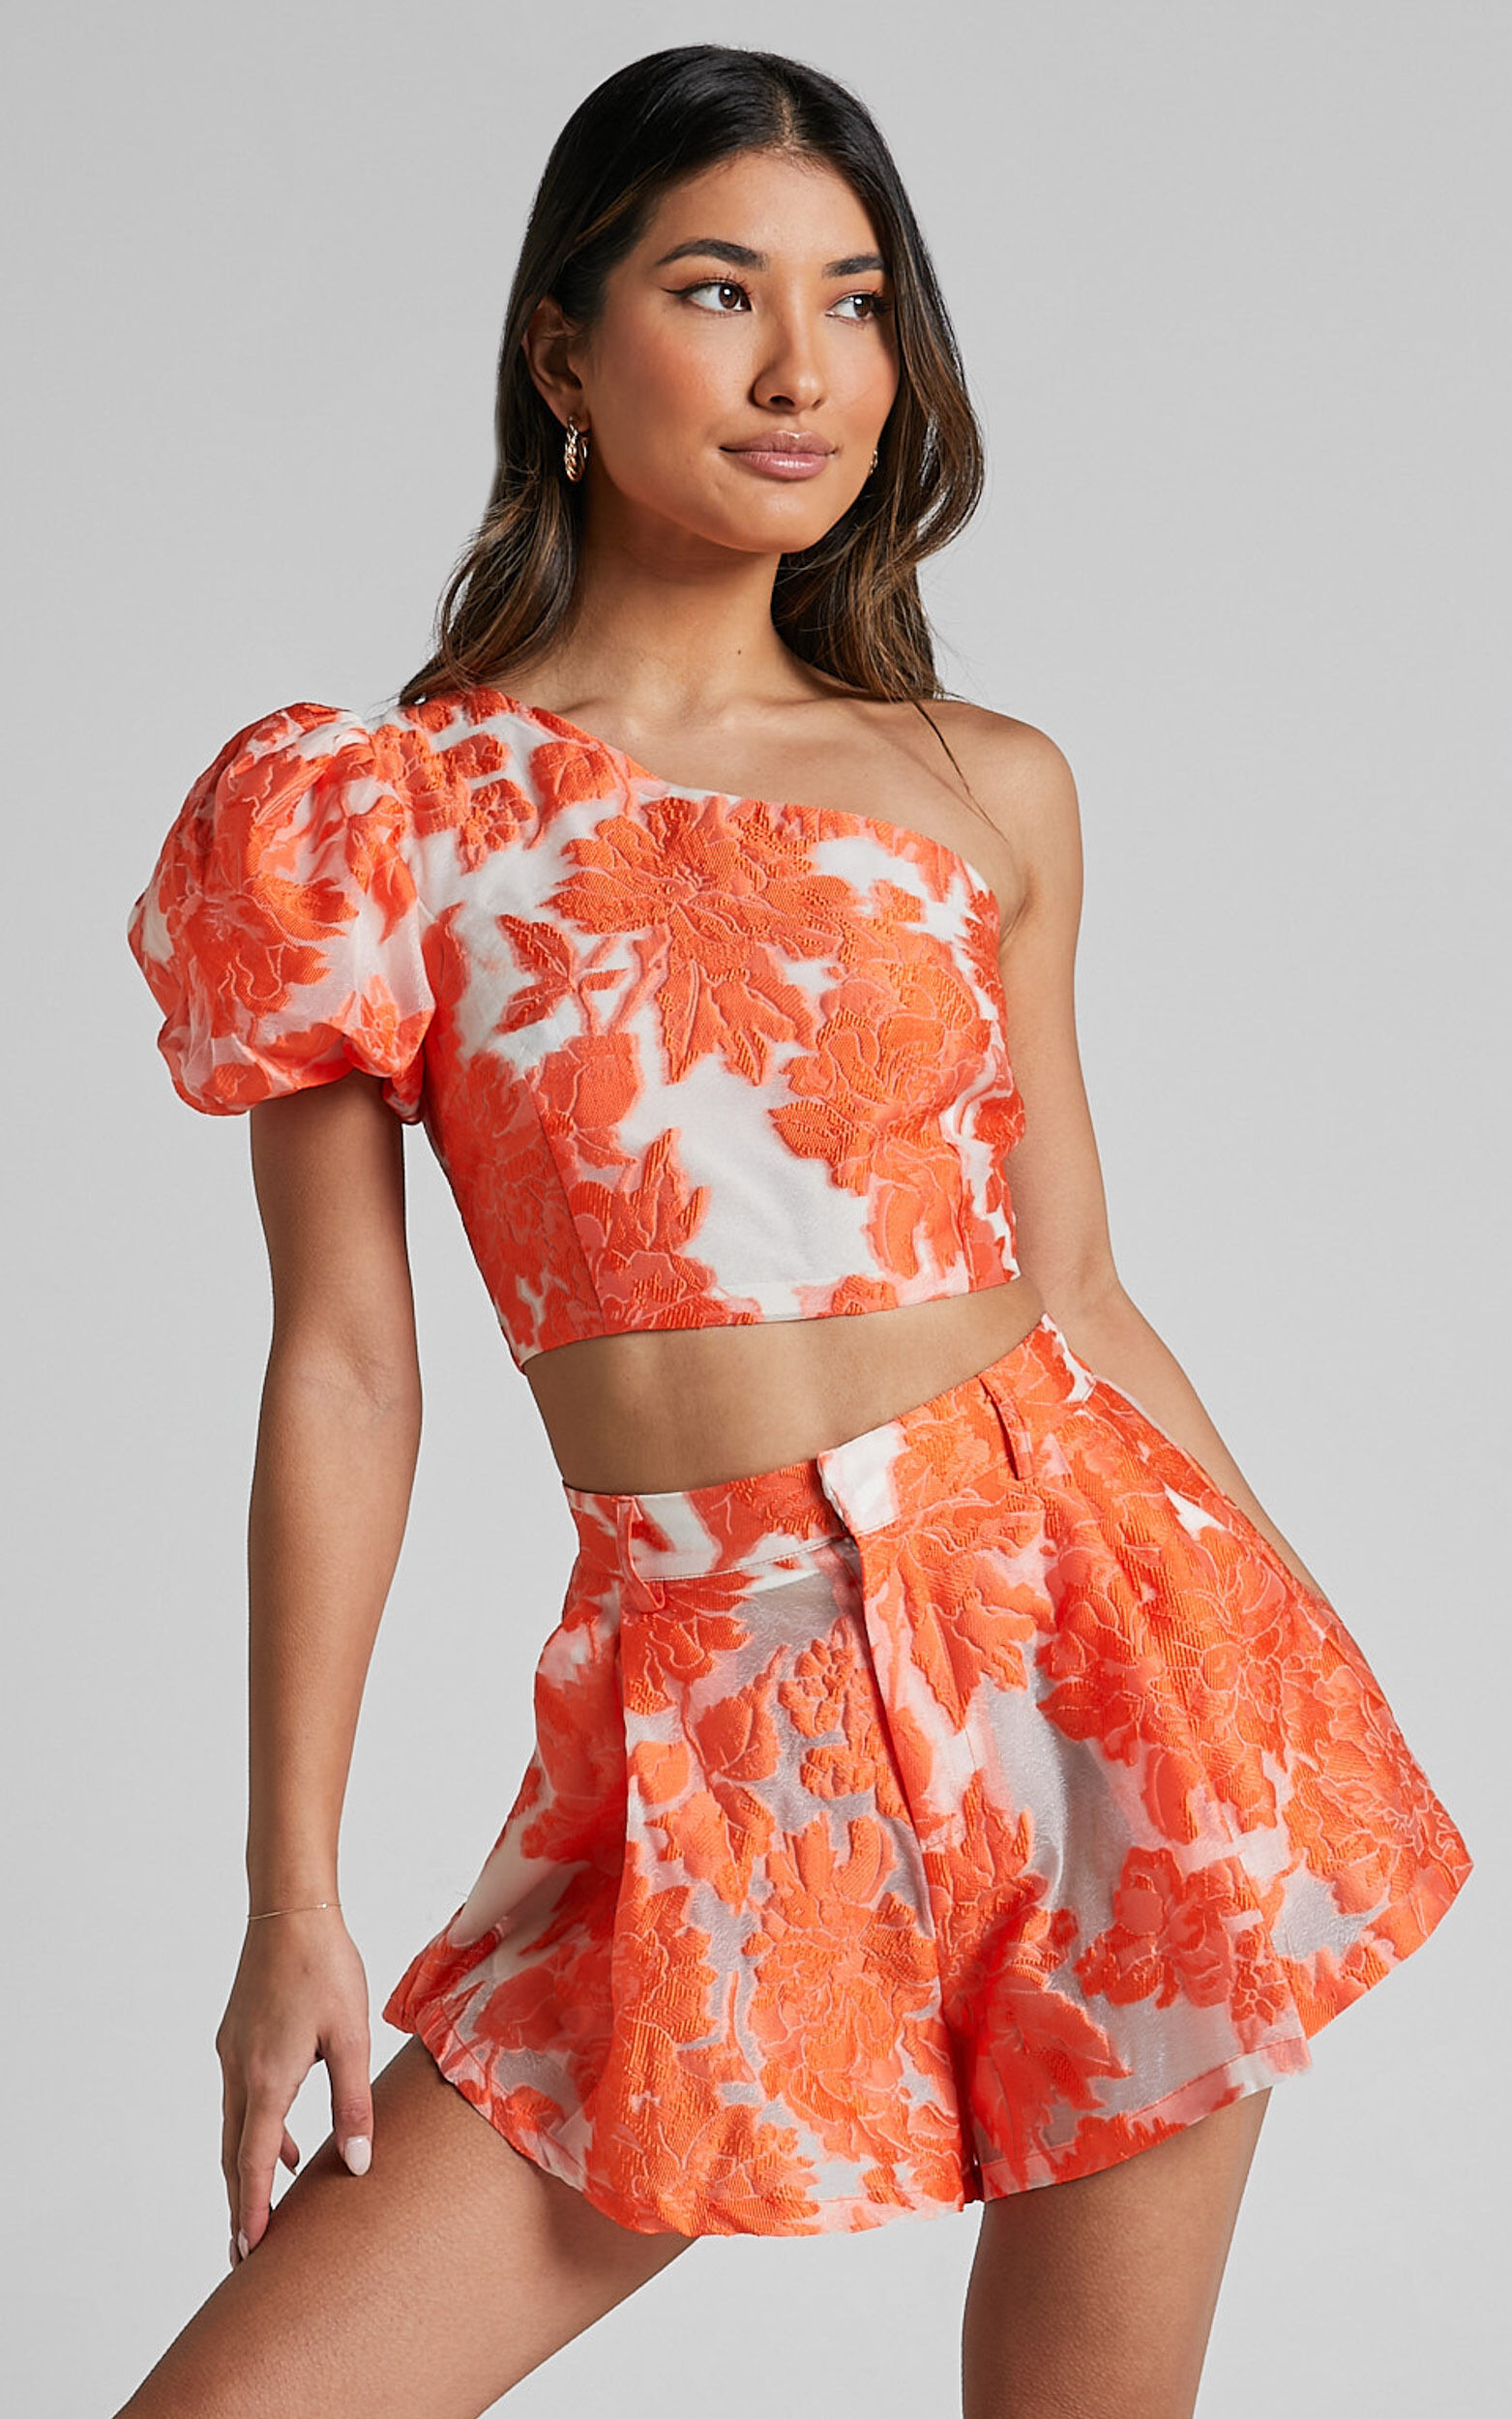 REORIAFEE Women Two Piece Outfits Beach Outfits Women's Summer Sweet  Pleated Floral Bra Chiffon Shorts Two Piece Set Orange S 